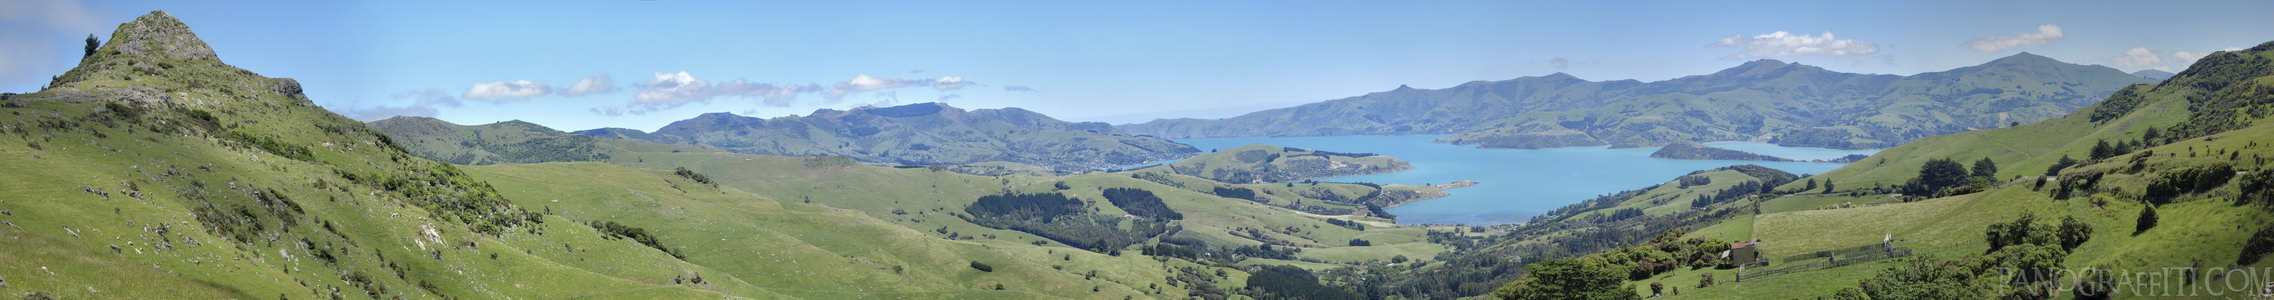 Akaroa Harbour from the Summit Road - Higher up on the Summer Road you can see more of Akaroa Harbour surrounded by the hills and peaks.